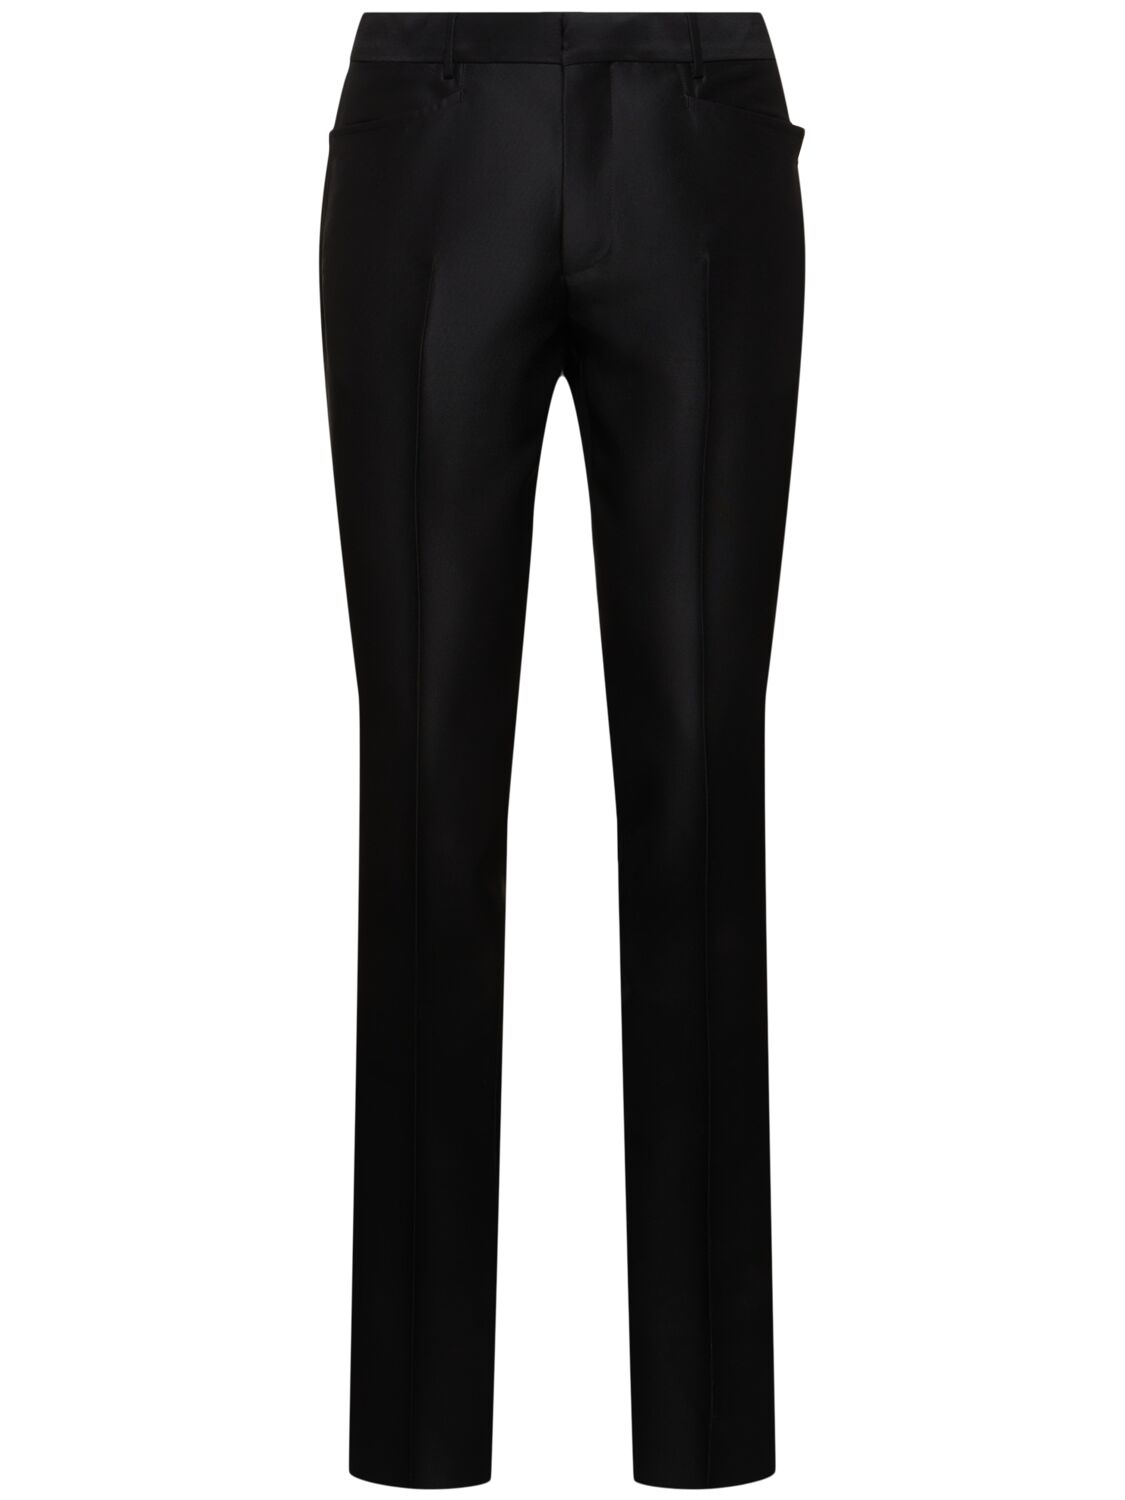 Image of Atticus Wool Blend Faille Pants